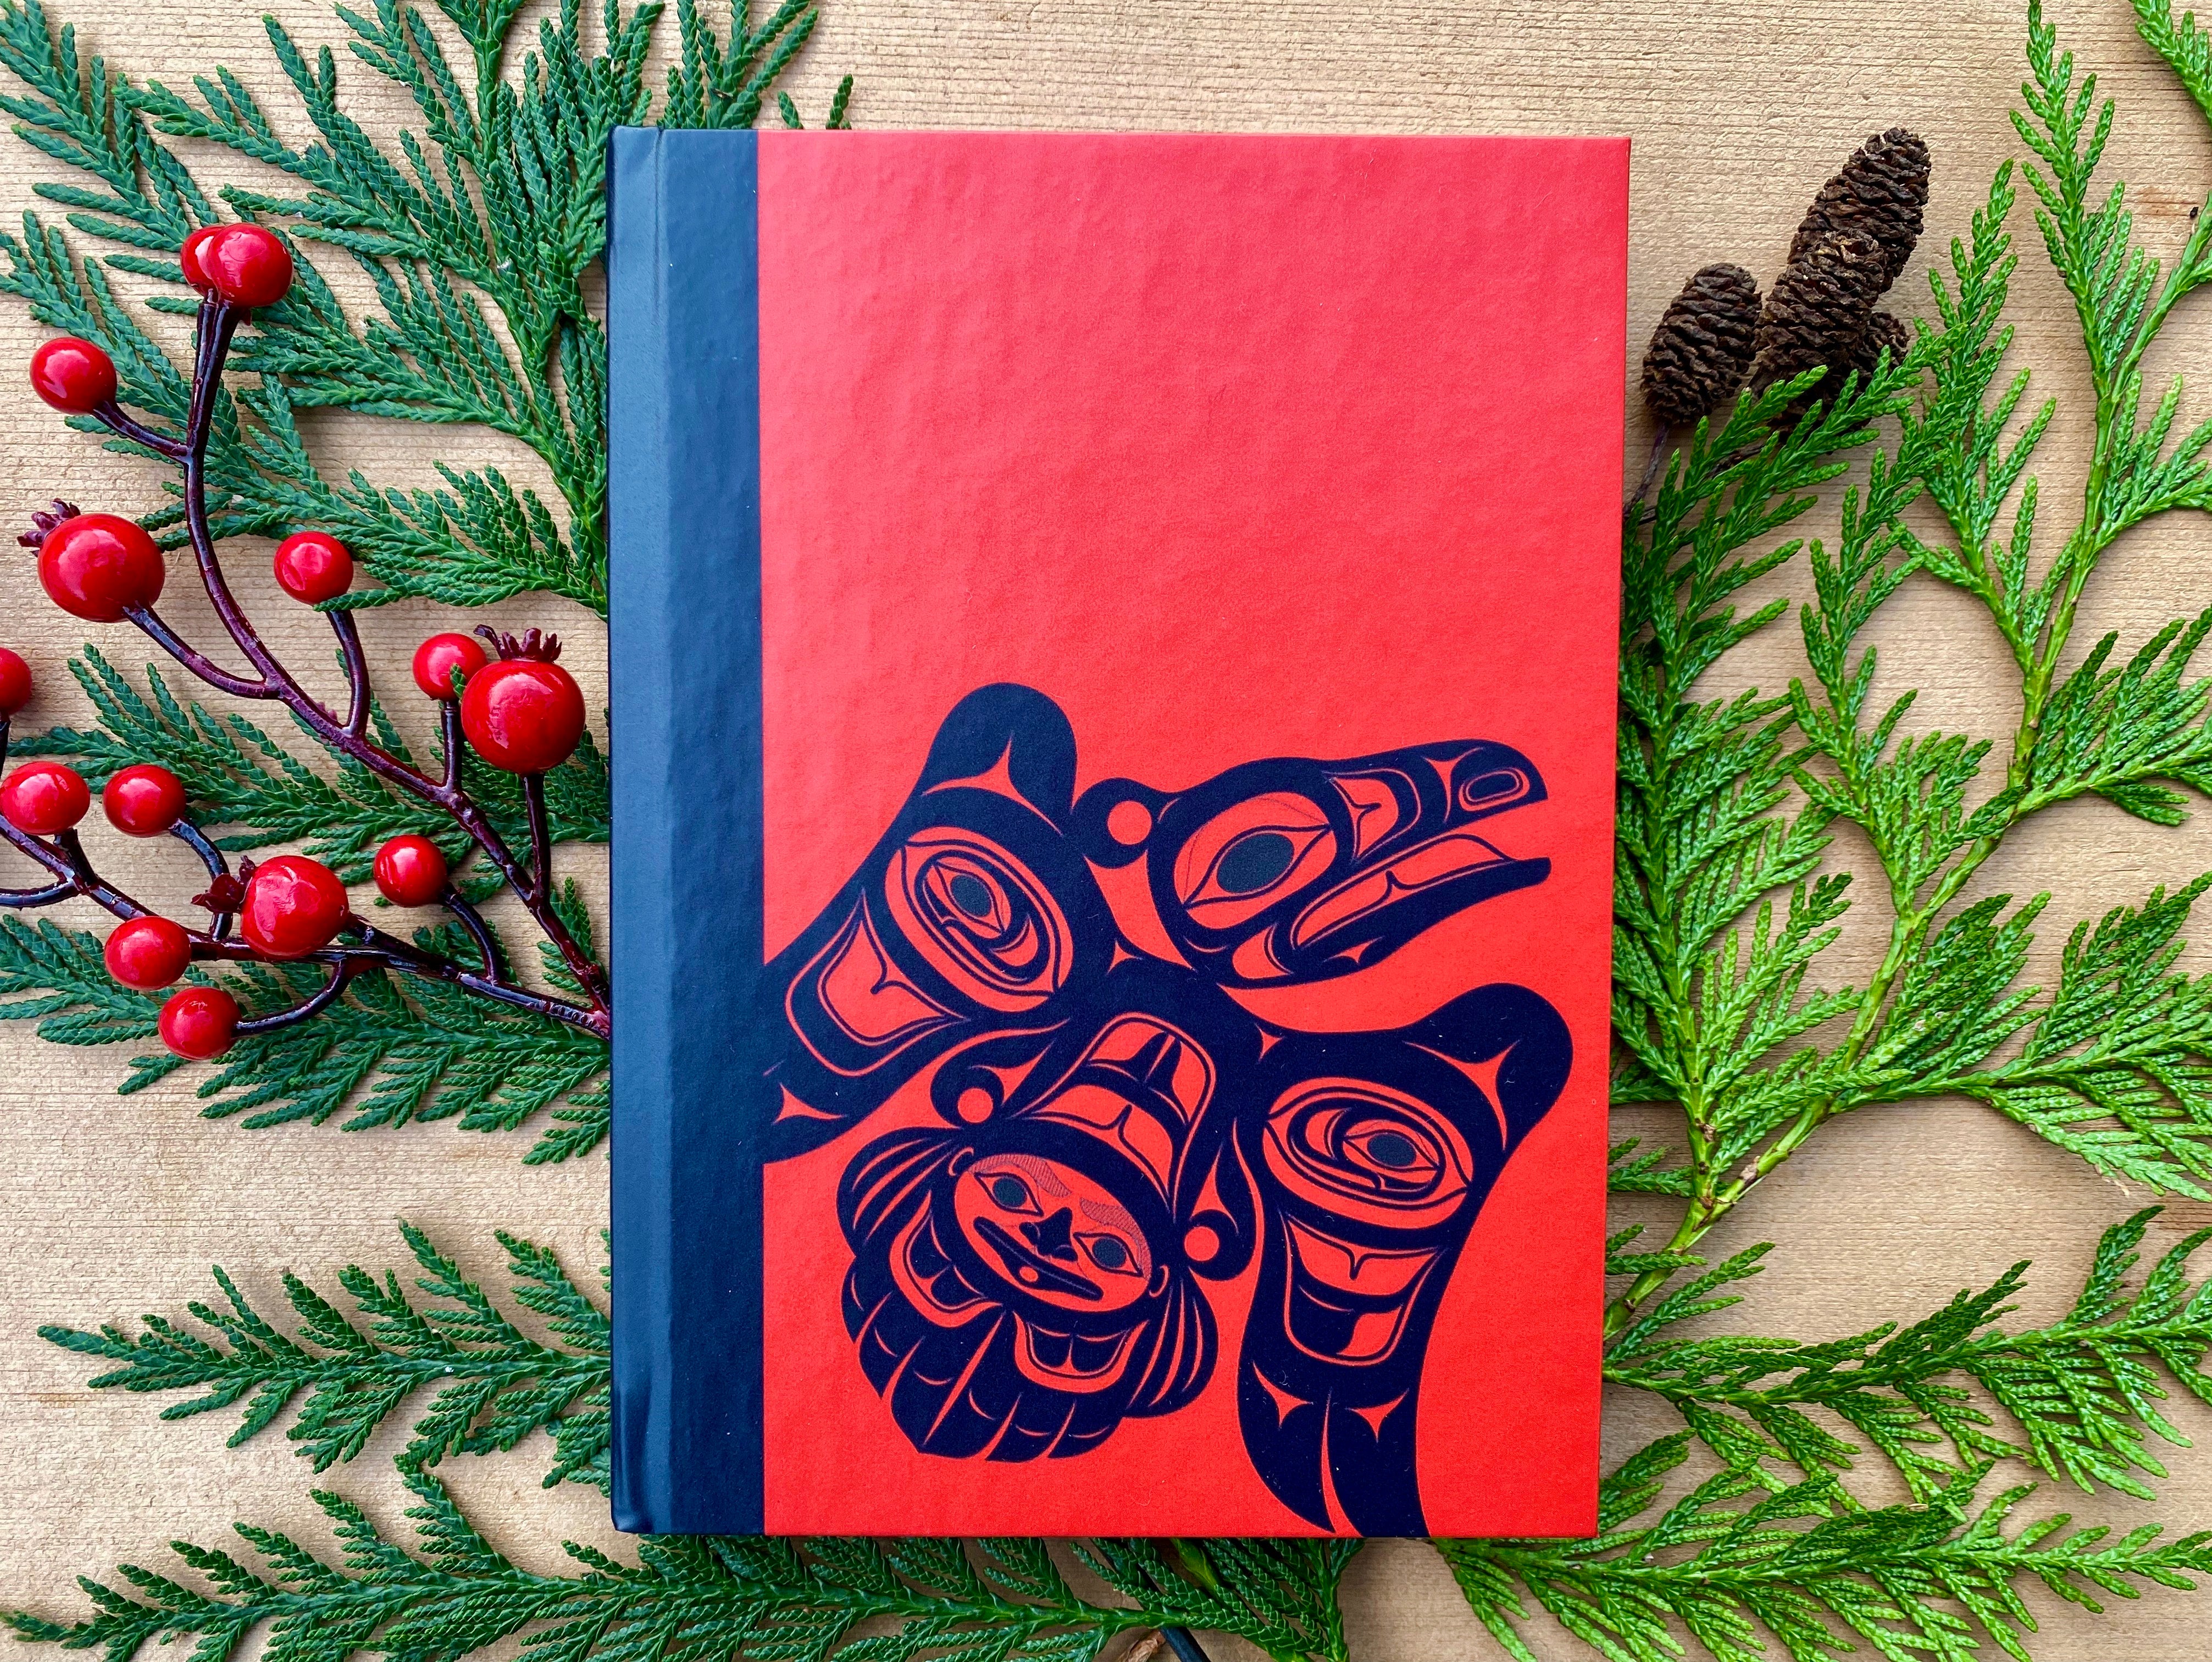 Raven's Journey Hard Bound Journal with Festive Staging for Christmas Holidays